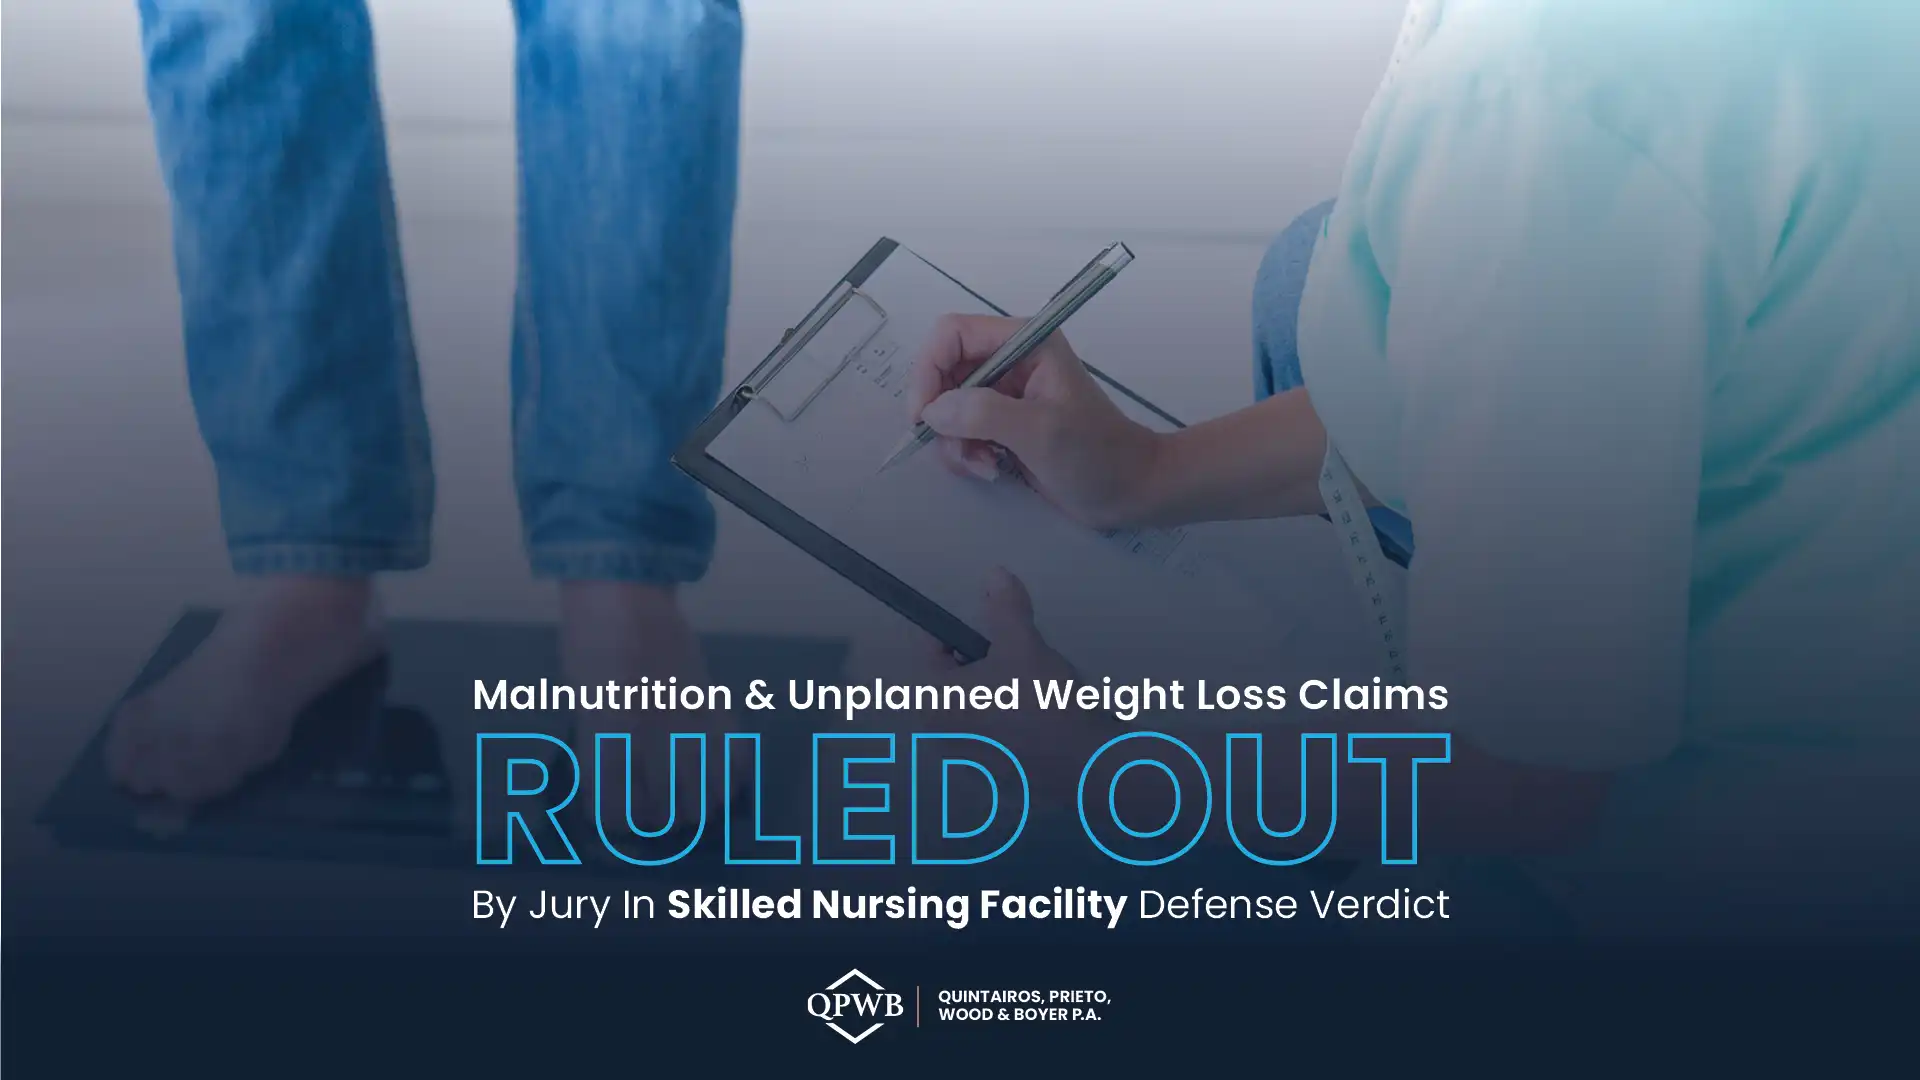 Malnutrition & Unplanned Weight Loss Claims Ruled Out By Jury Decision in Skilled Nursing Facility Defense Verdict